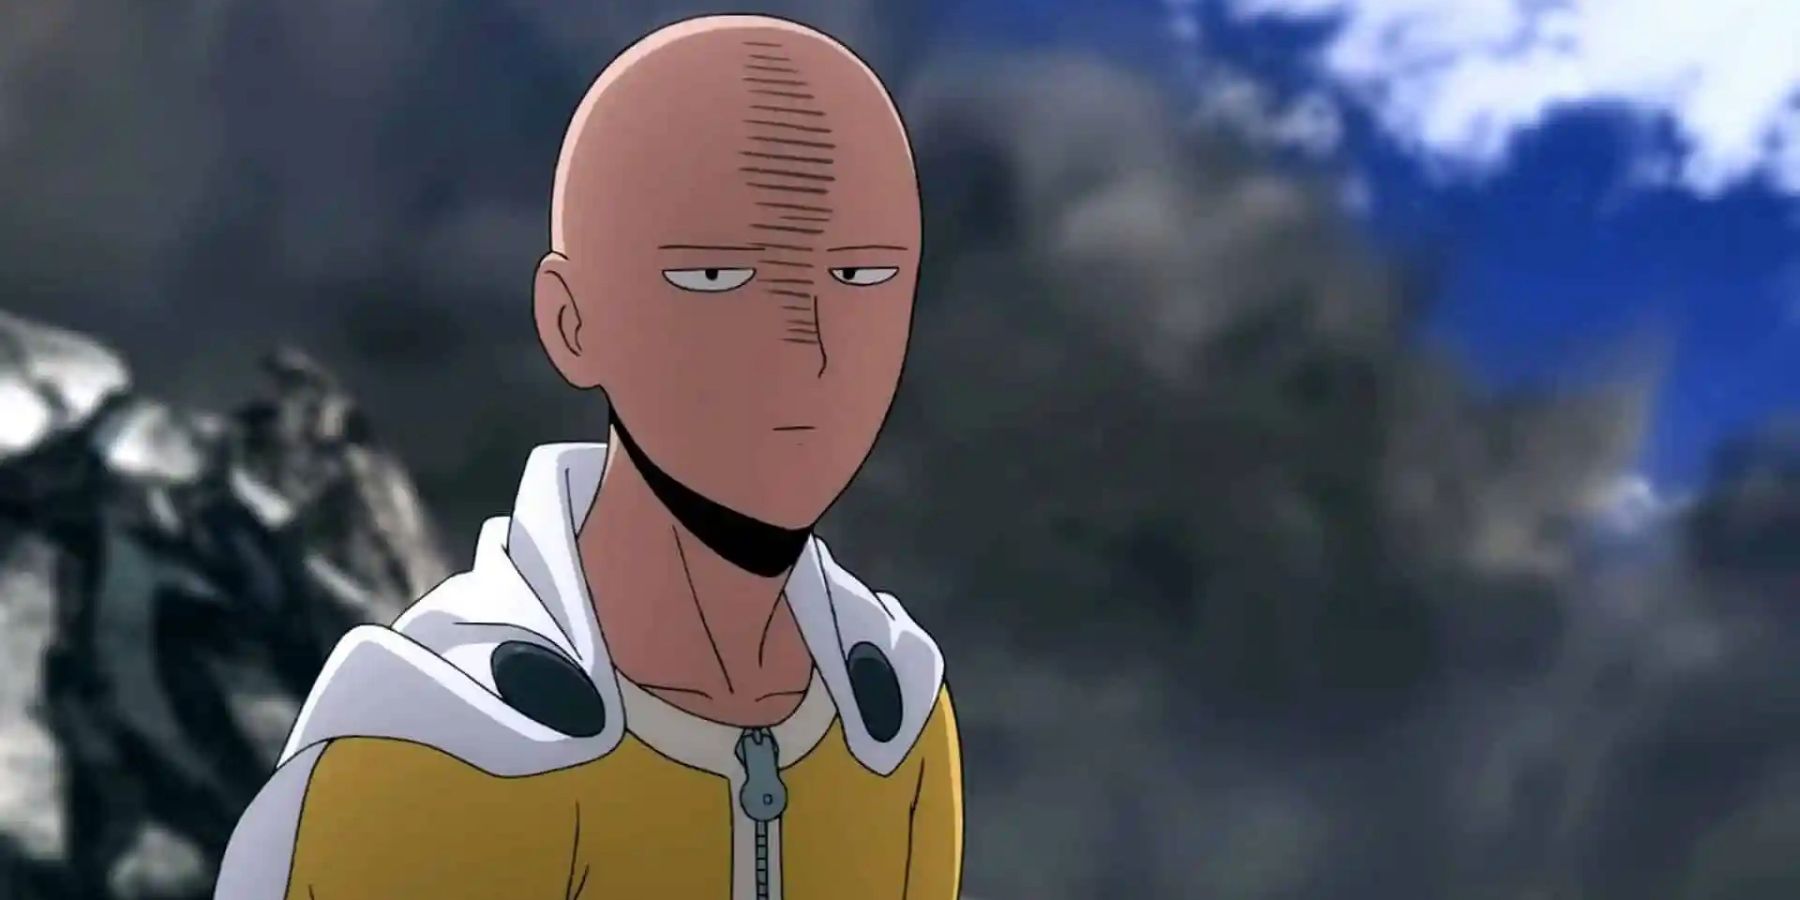 Saitama frowning in an episode of One Punch Man